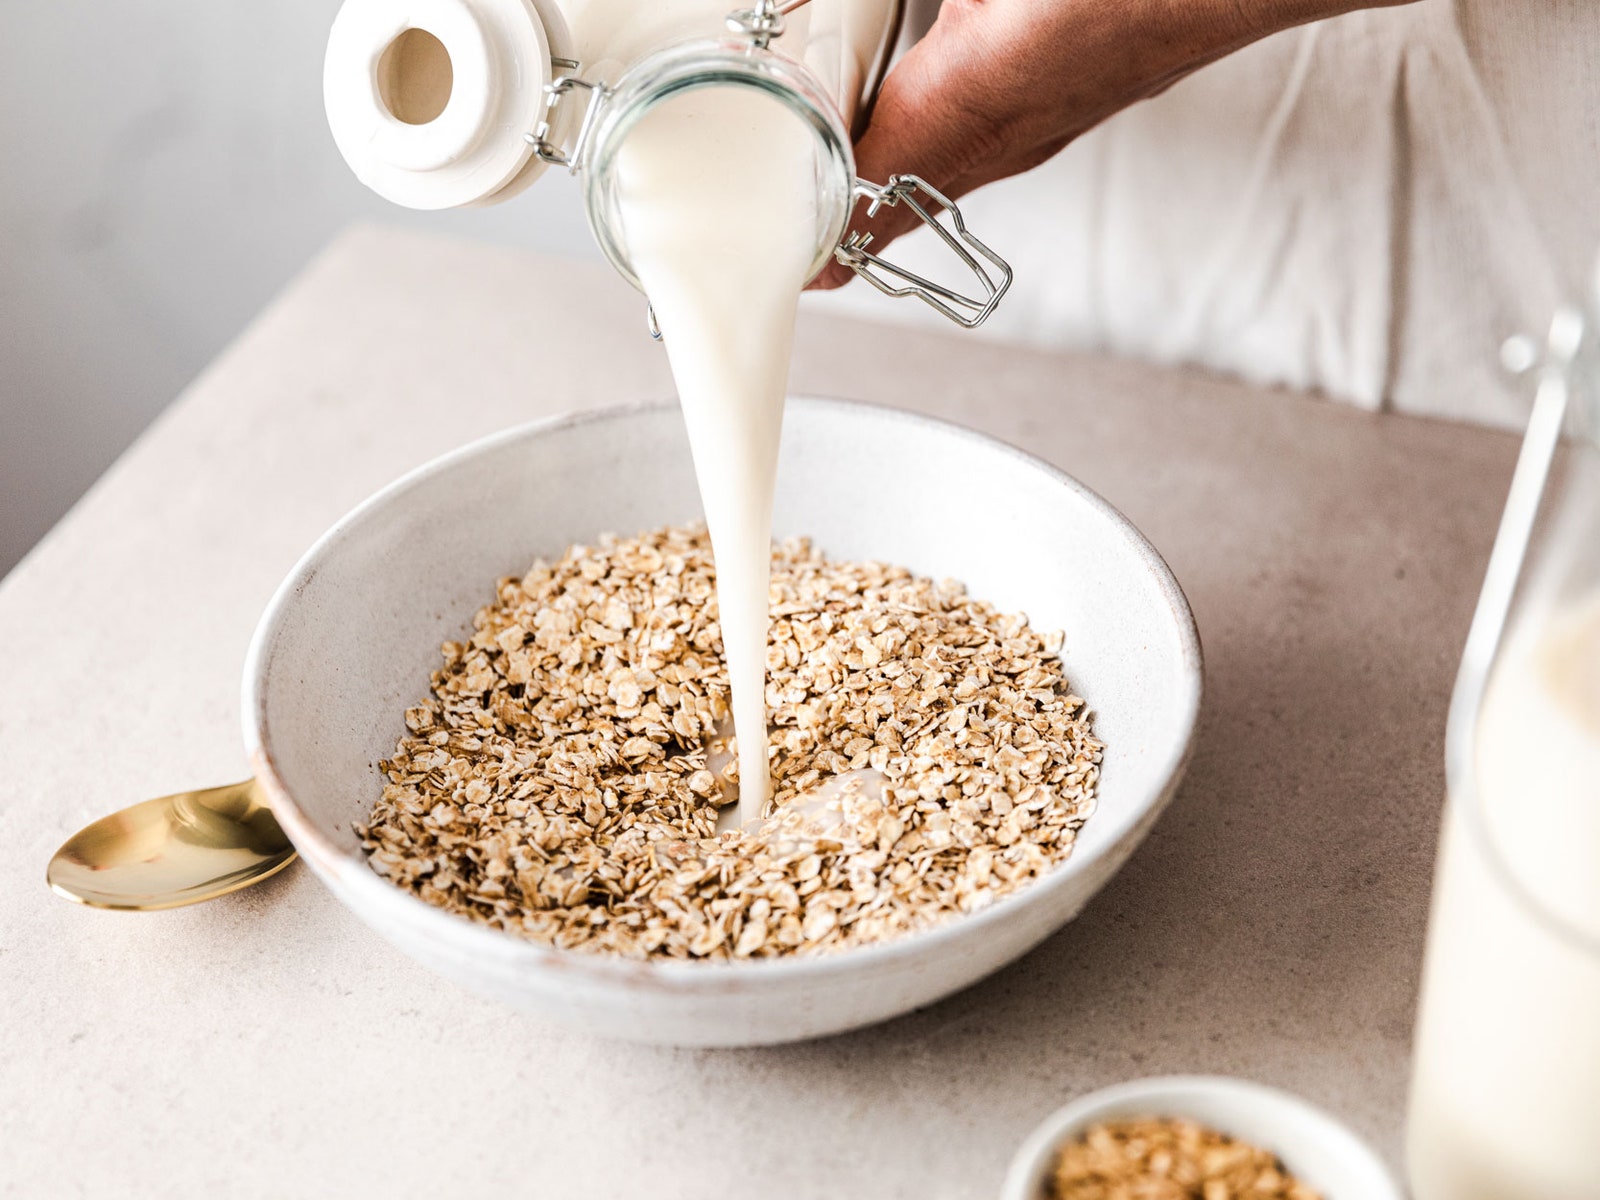 Thinking about breaking up with oat milk? Read these 4 myths about the plant-based drink first